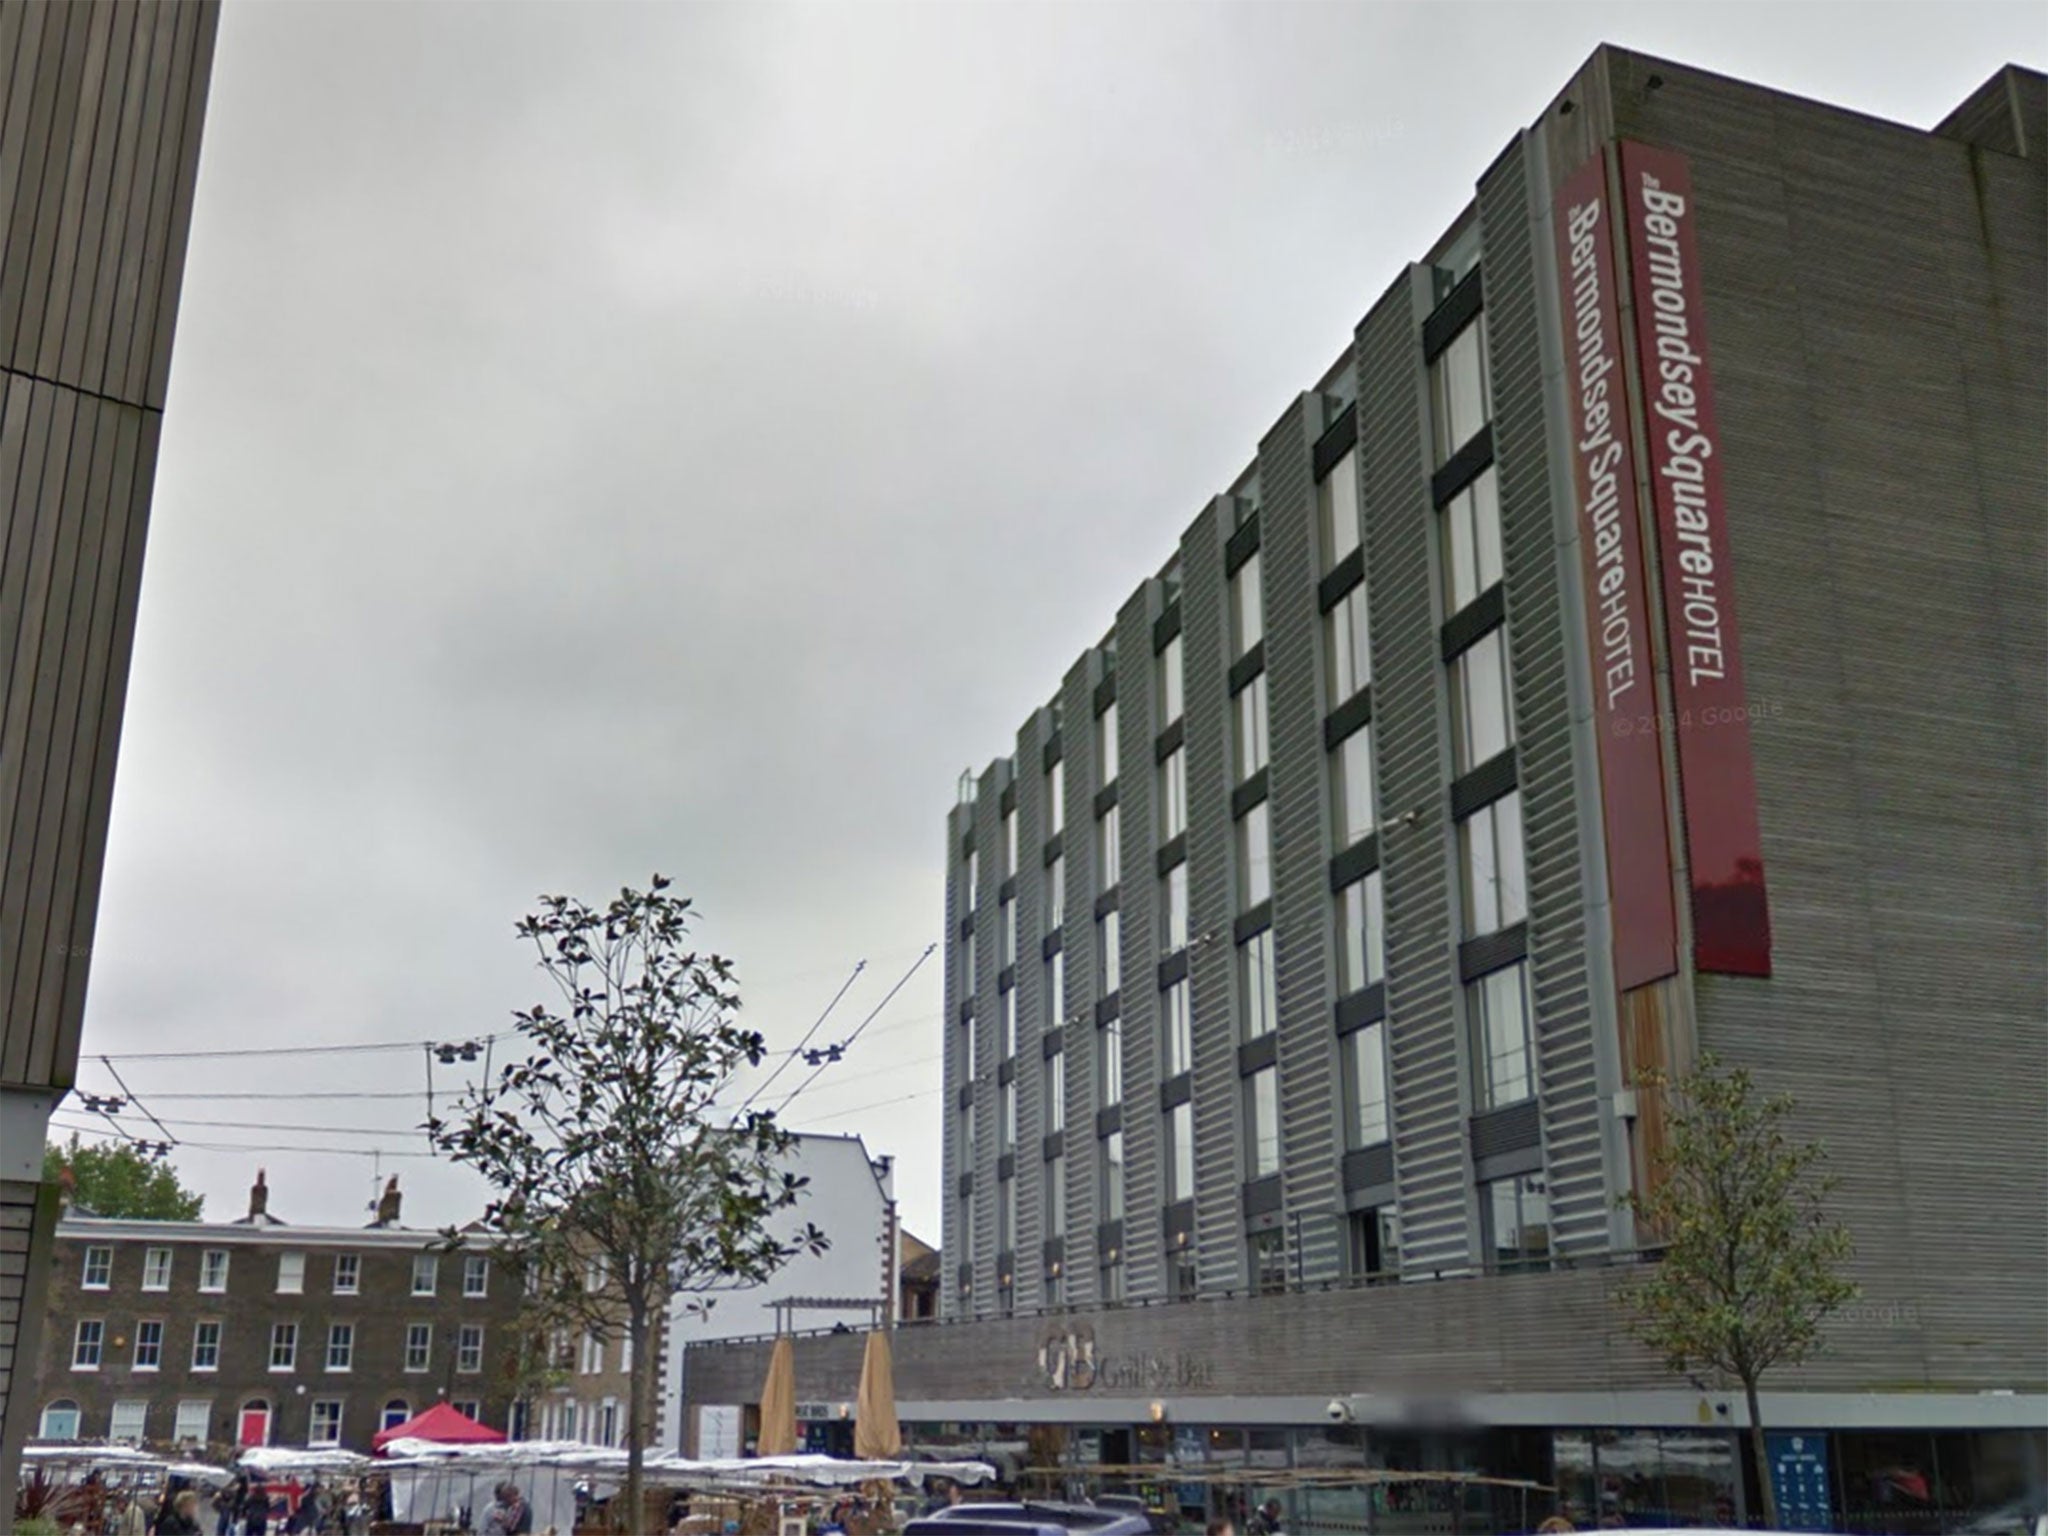 Bermondsey Square Hotel has stopped serving alcohol in its bar